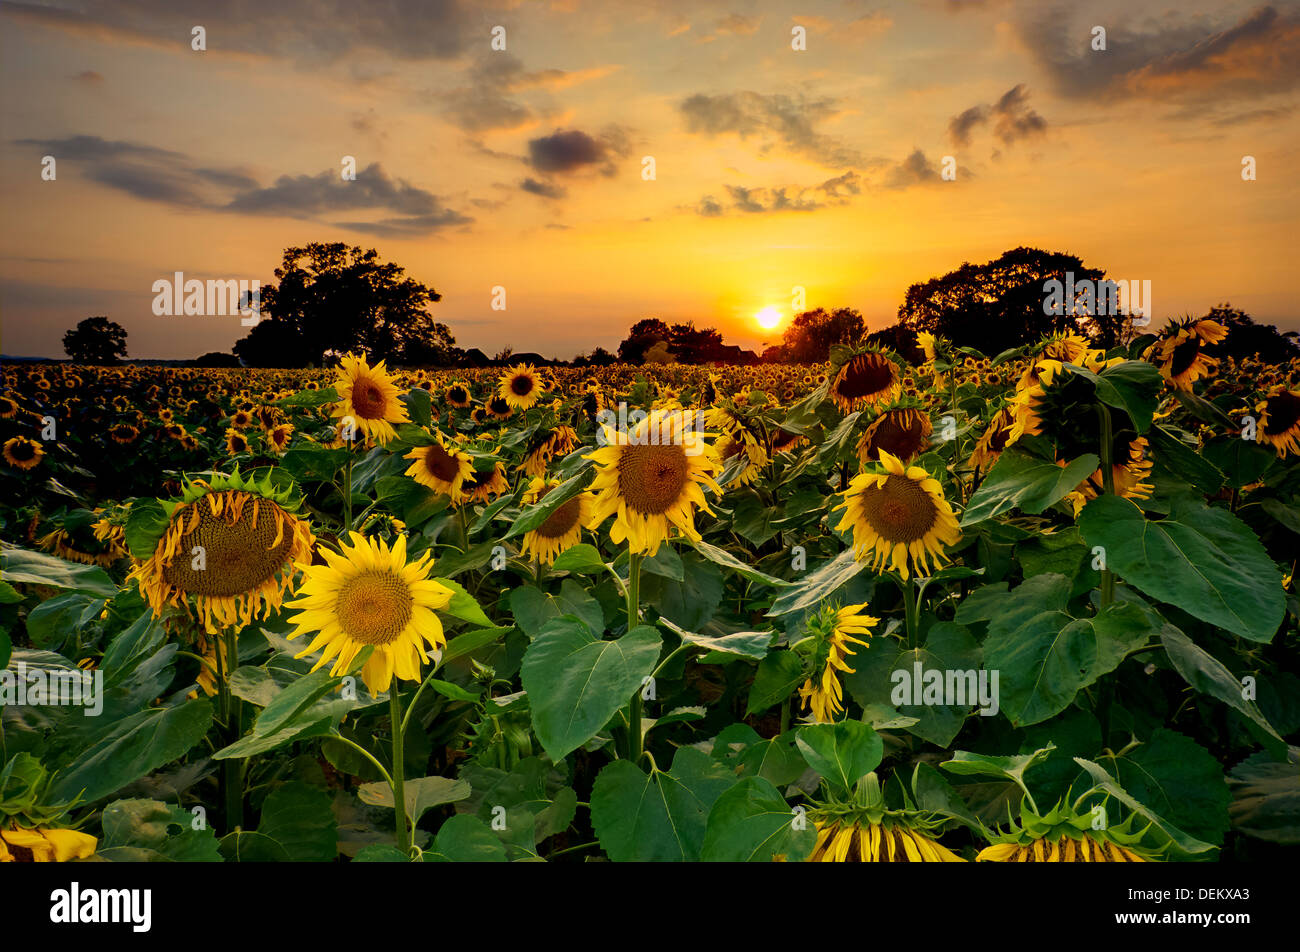 sunflowers in field, East Sussex, England, UK, Europe Stock Photo